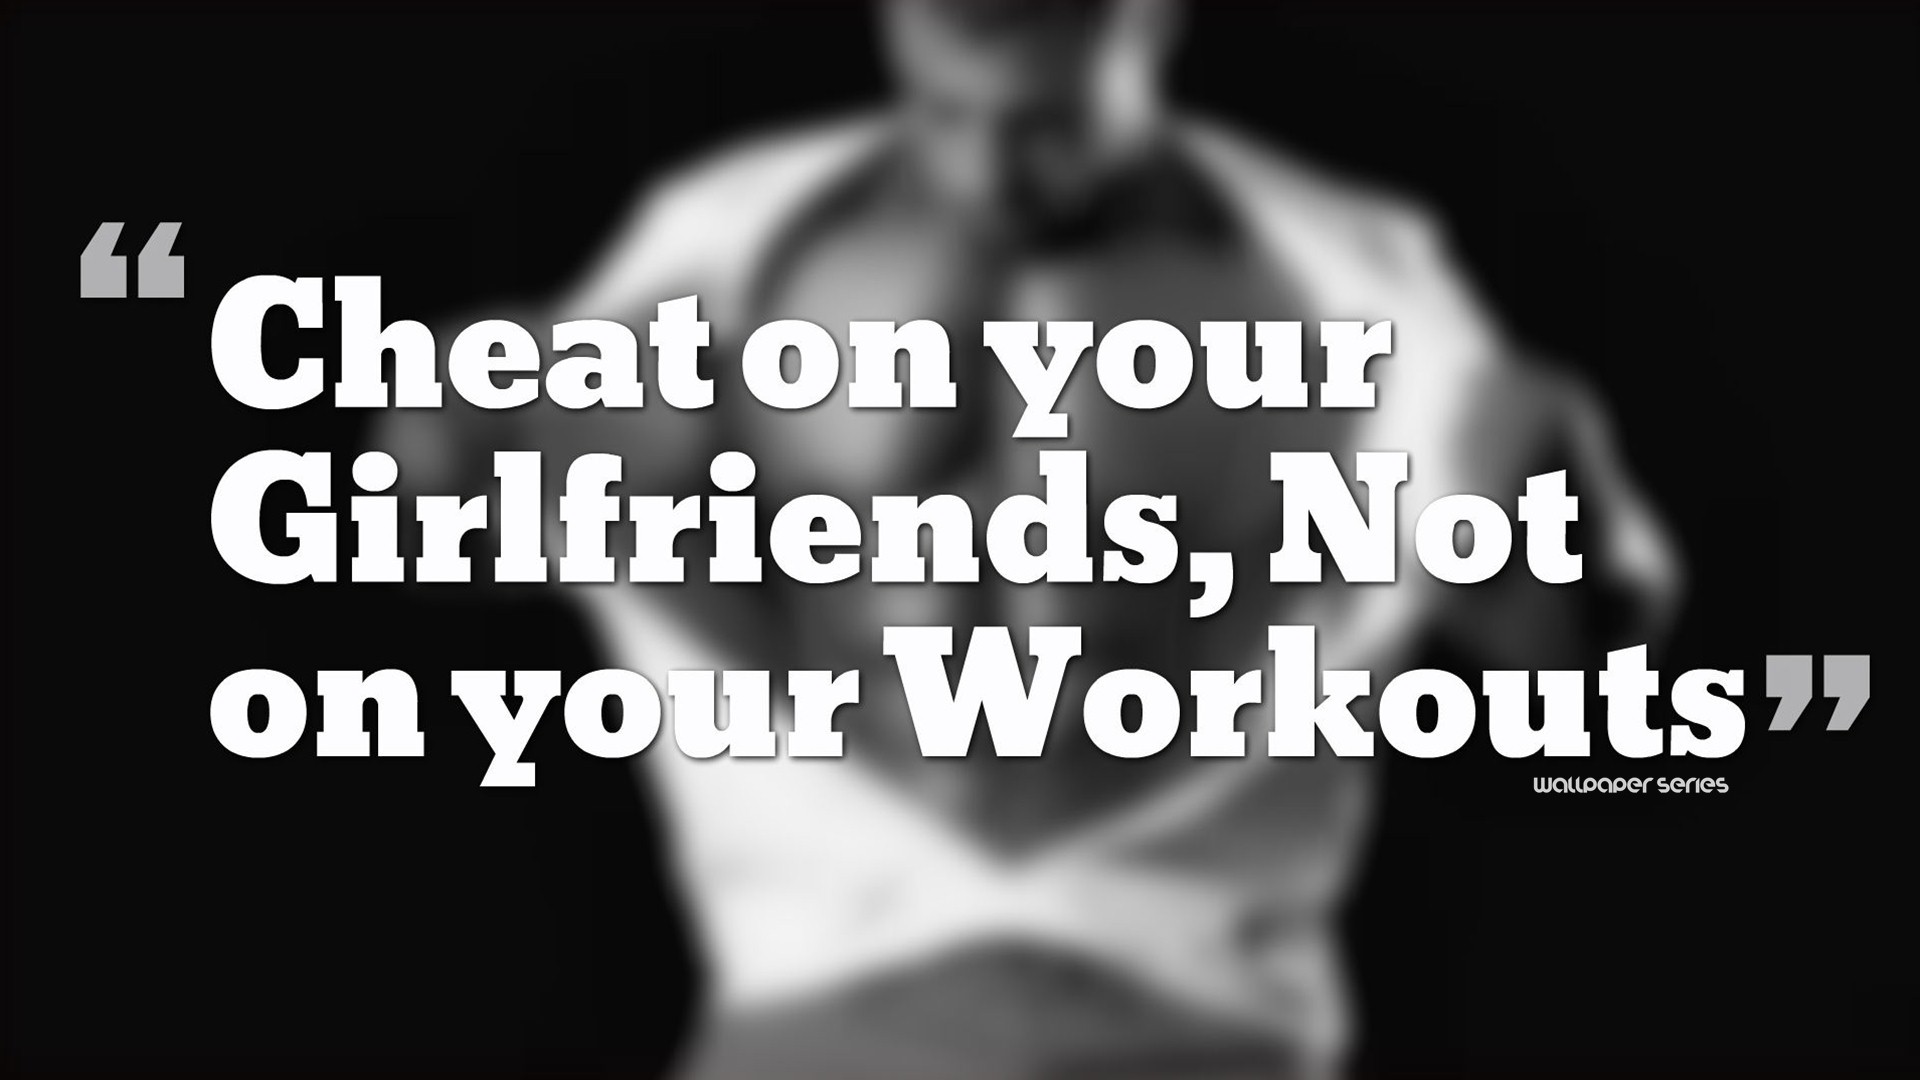 Workout Funny Gym Quotes Hd Wallpaper 05875 Download - Gym Quotes , HD Wallpaper & Backgrounds